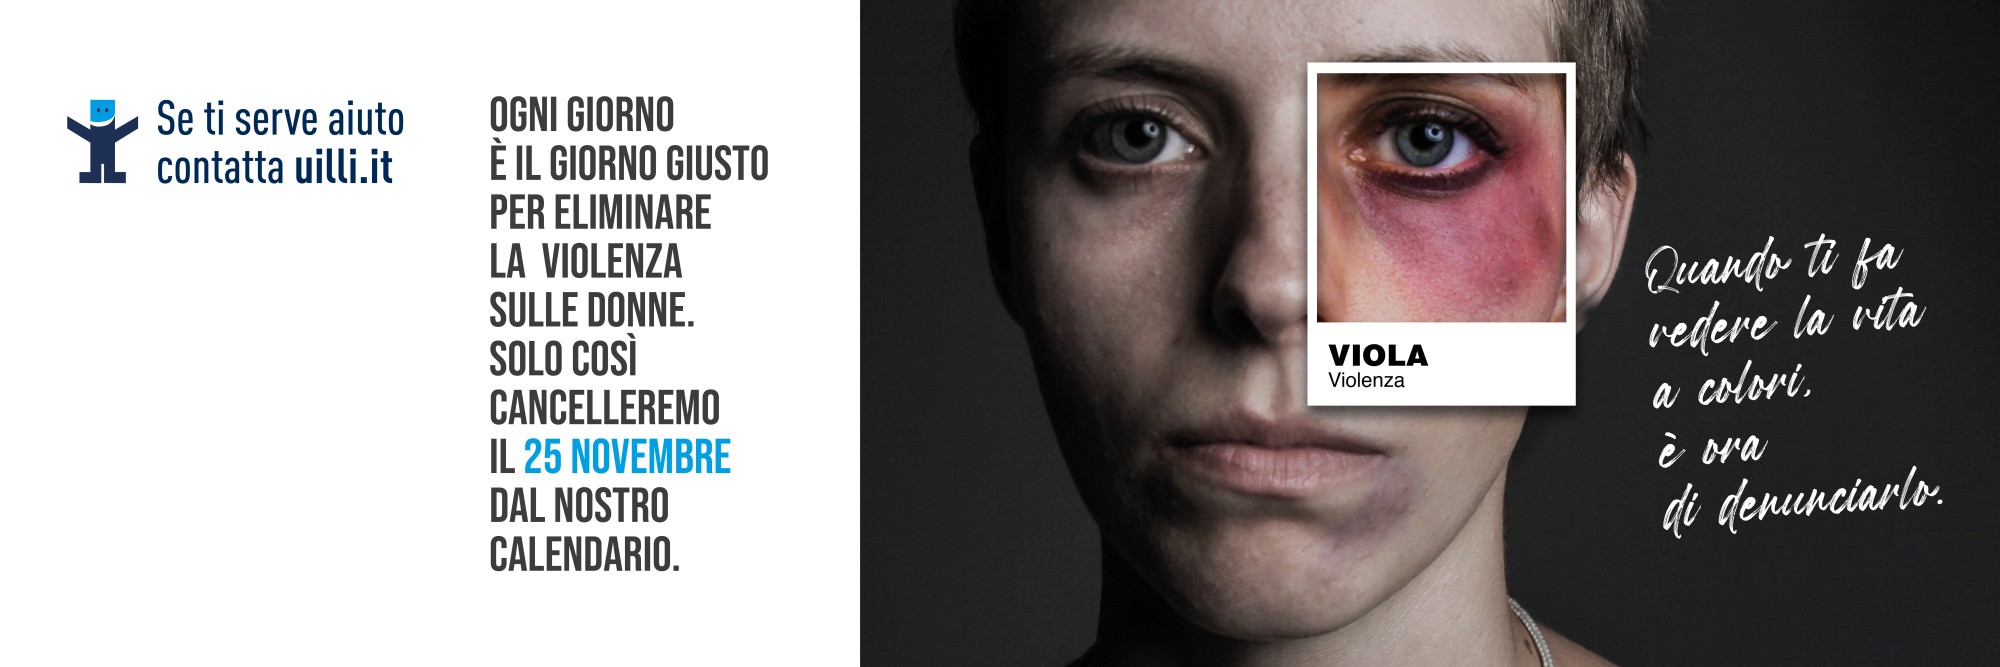 Campagna violenza donne 22 Cover Twitter